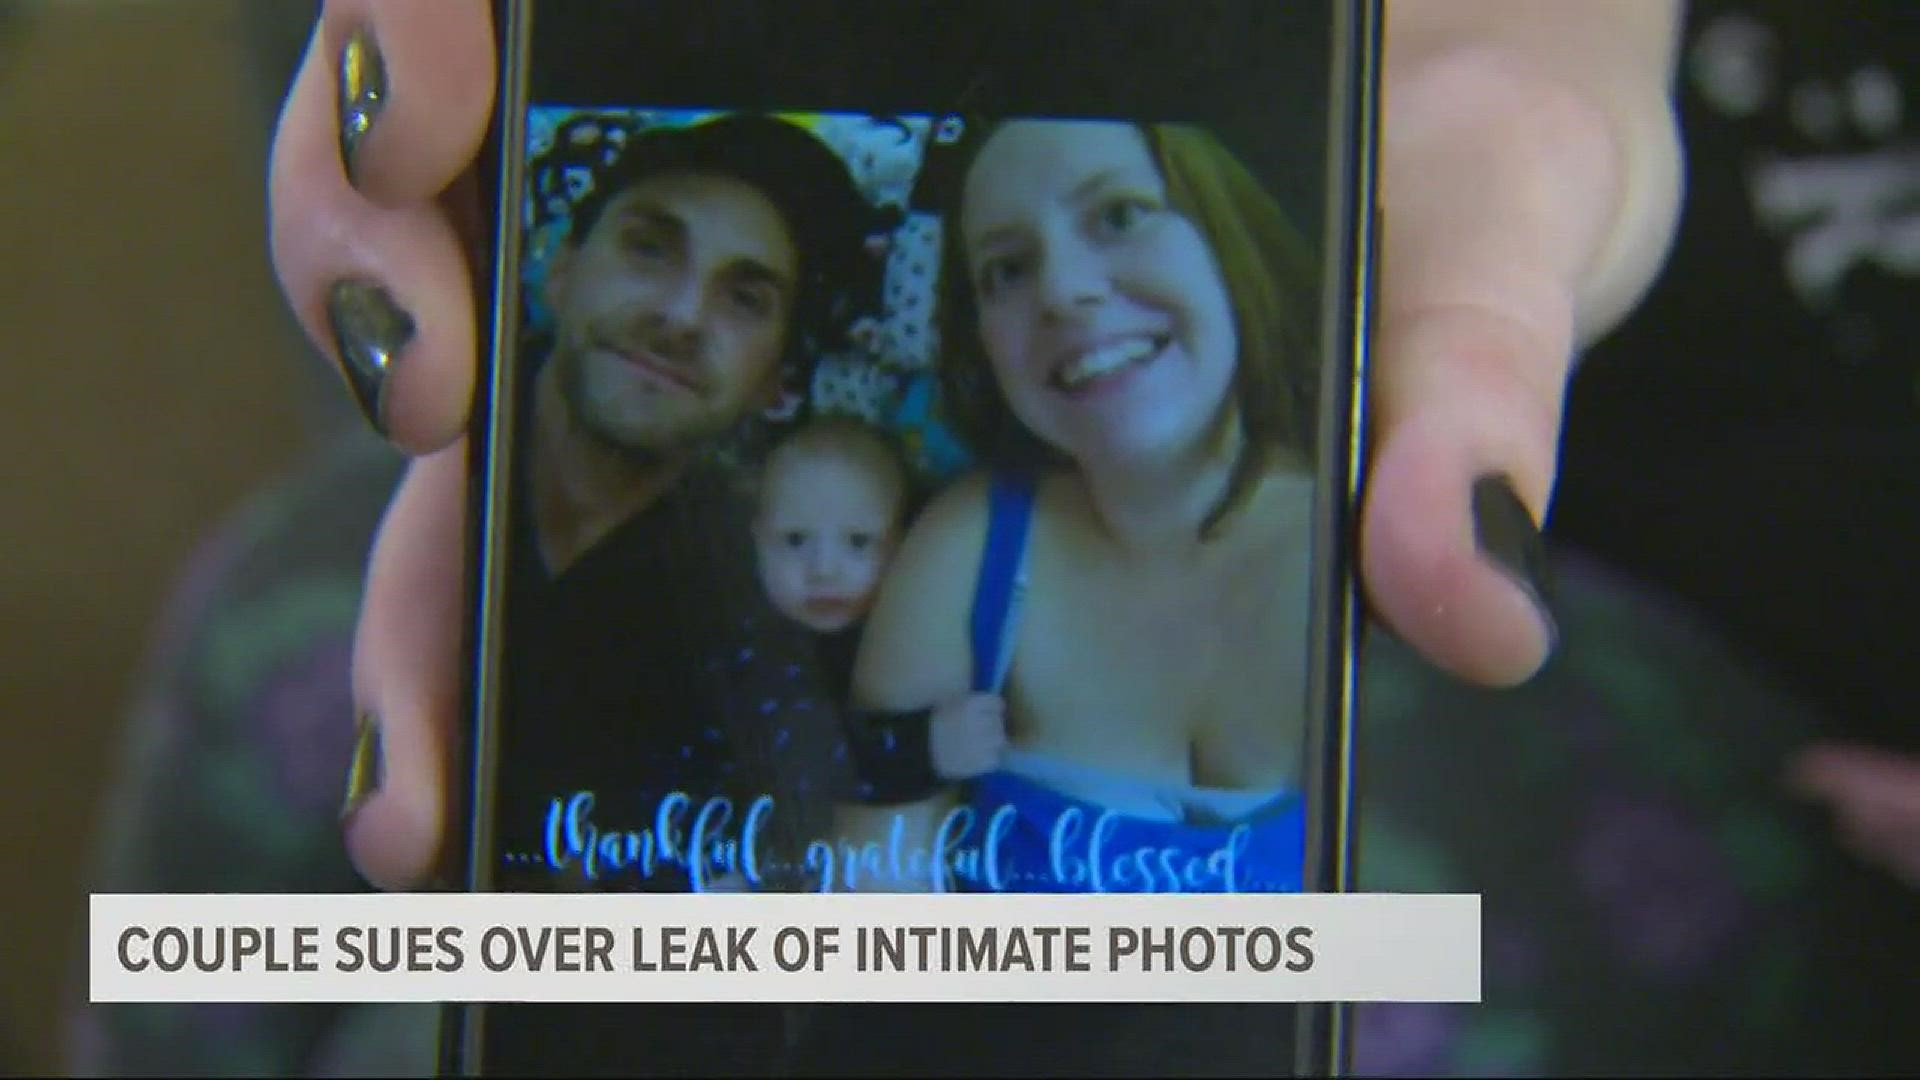 A Canby couple is suing Verizon alleging the company failed to secure their private photos.